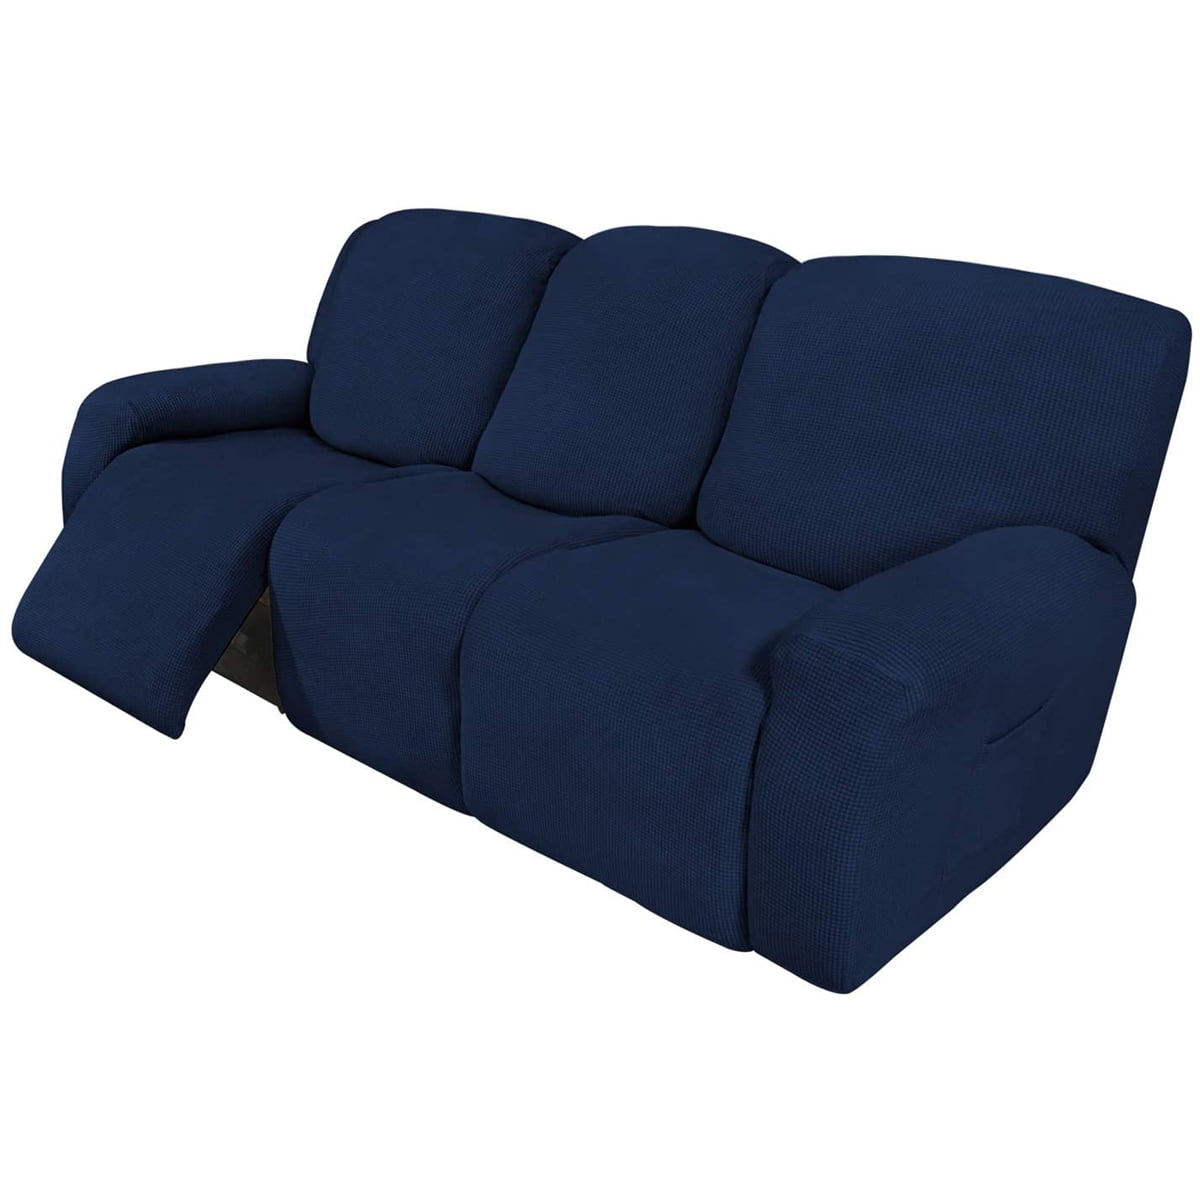 Details about   Recliner Sofa Covers Reclining  Loveseat recliner cover for 3 seats and 2 seats 